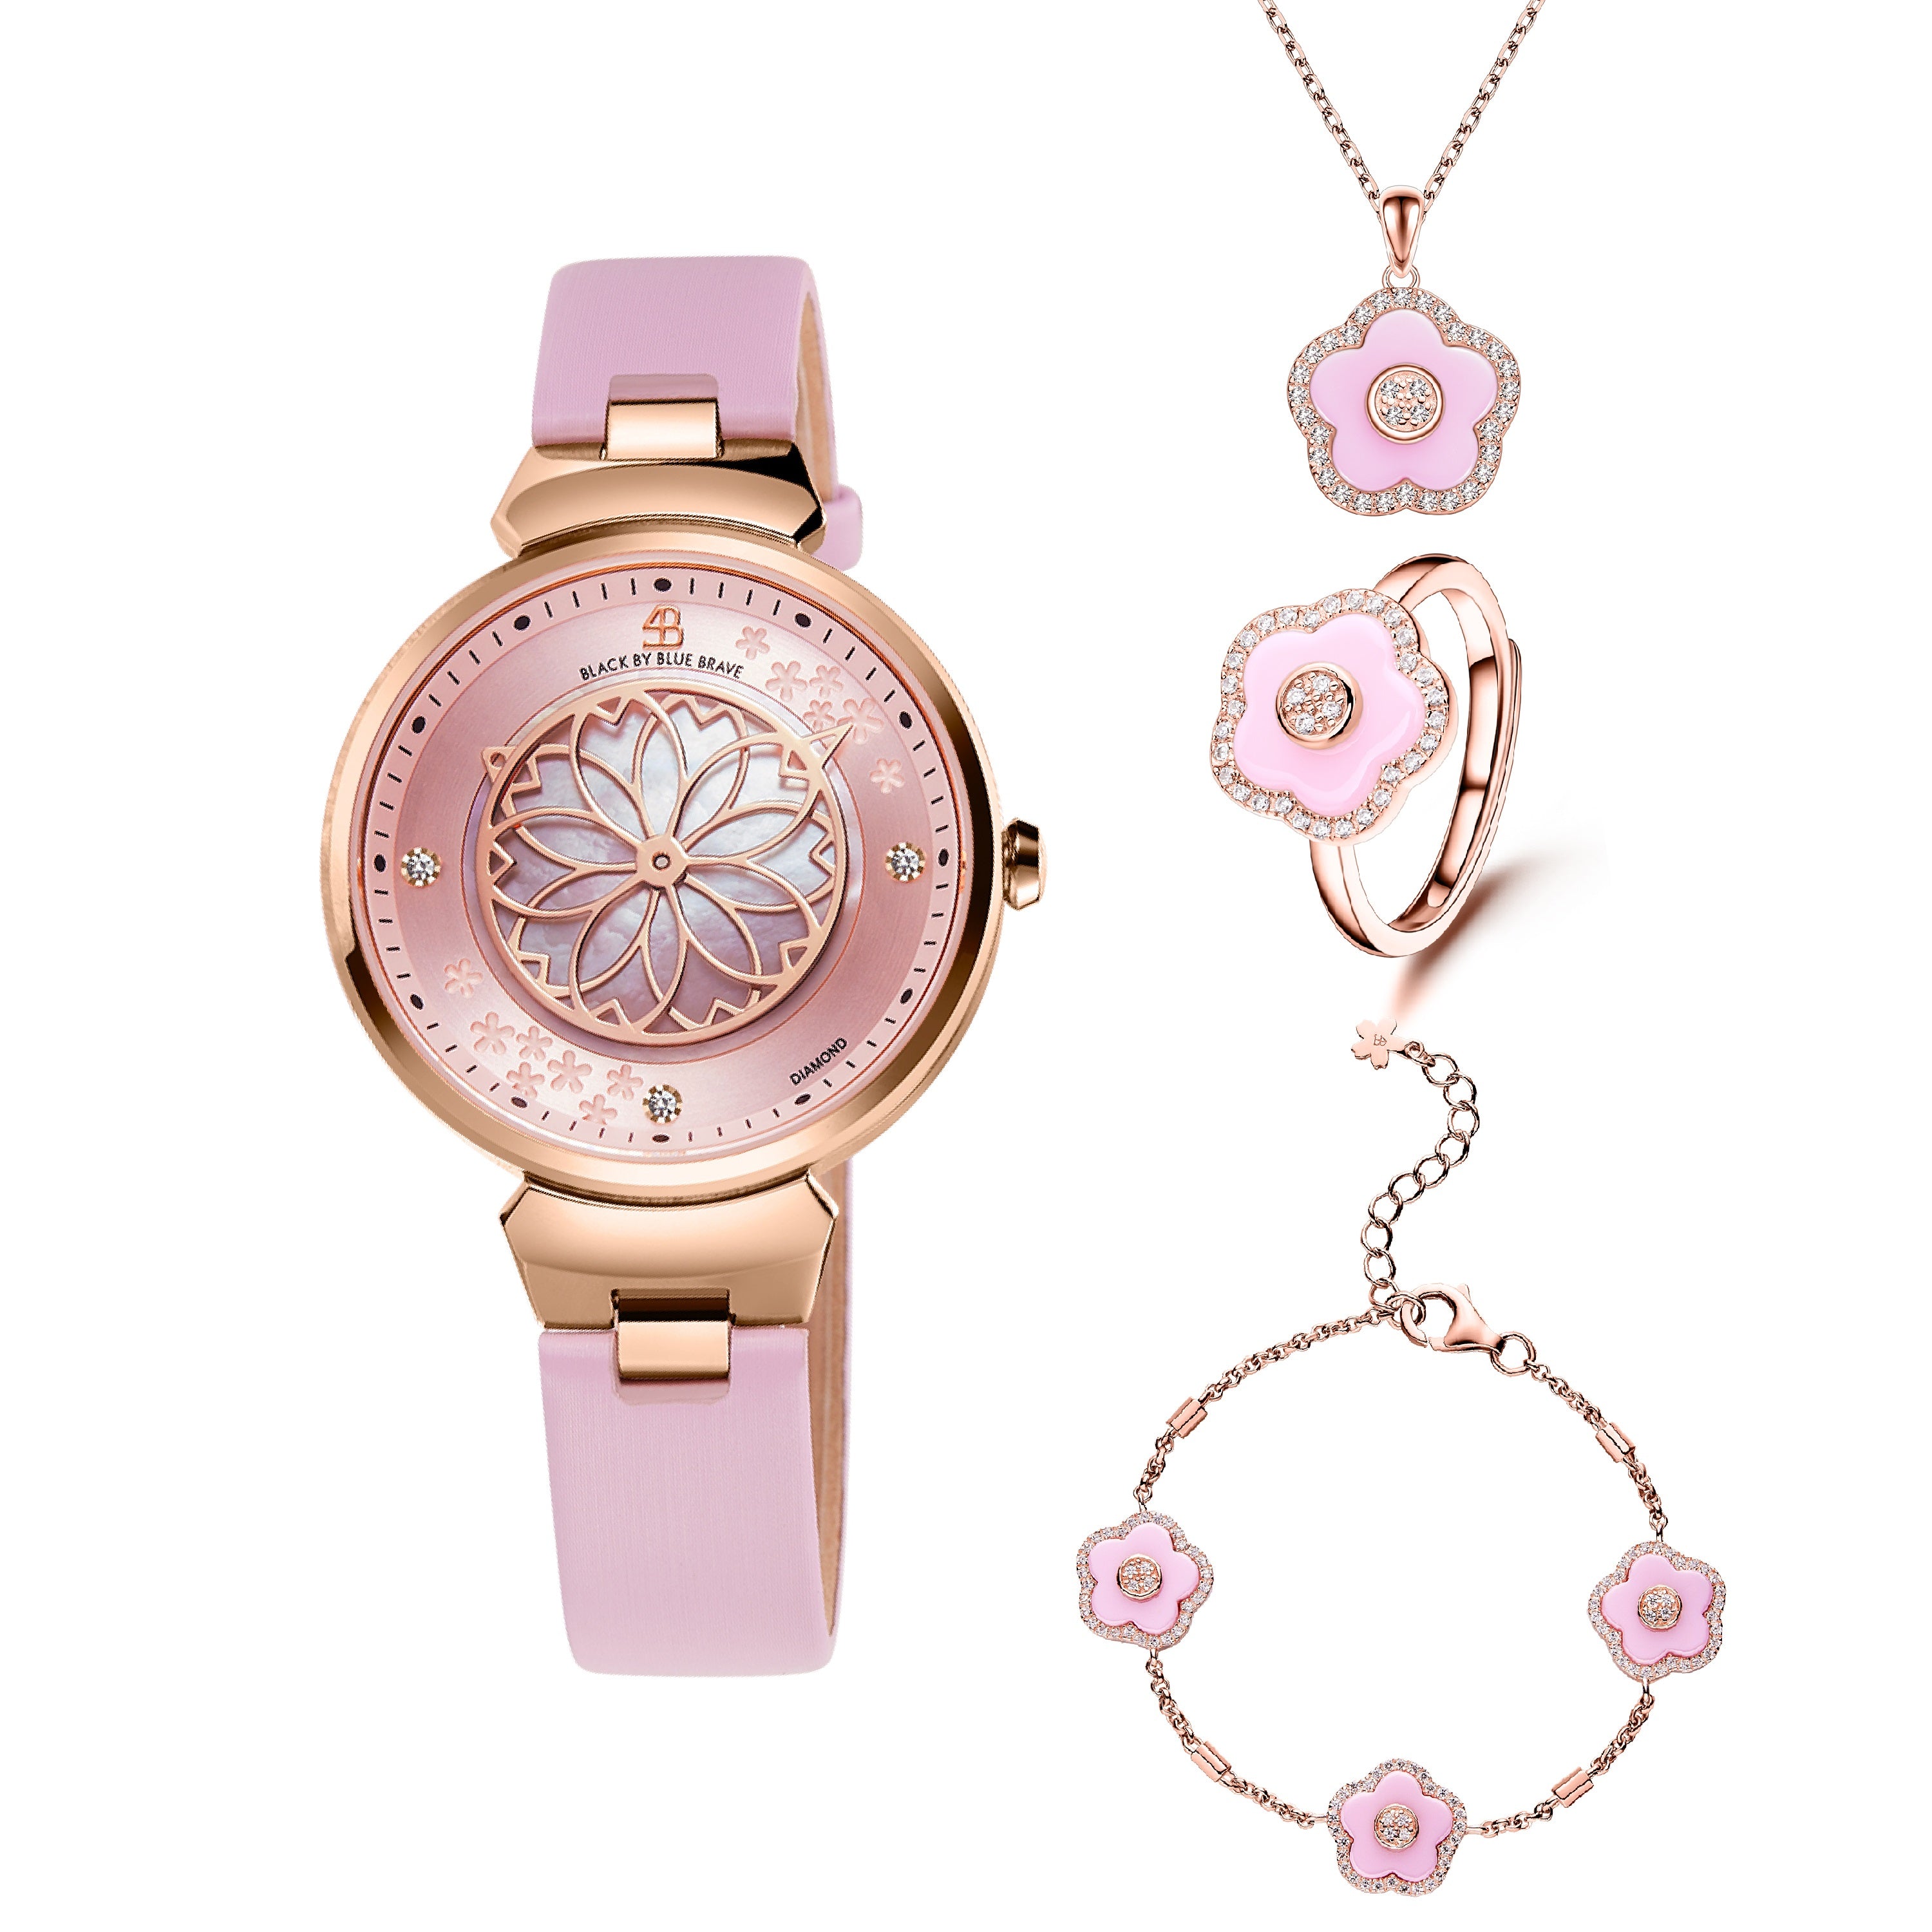 Pink Cherry Blossom Watch With Flower Ceramic Jewelleries (Ring, Necklace and Bracelet)